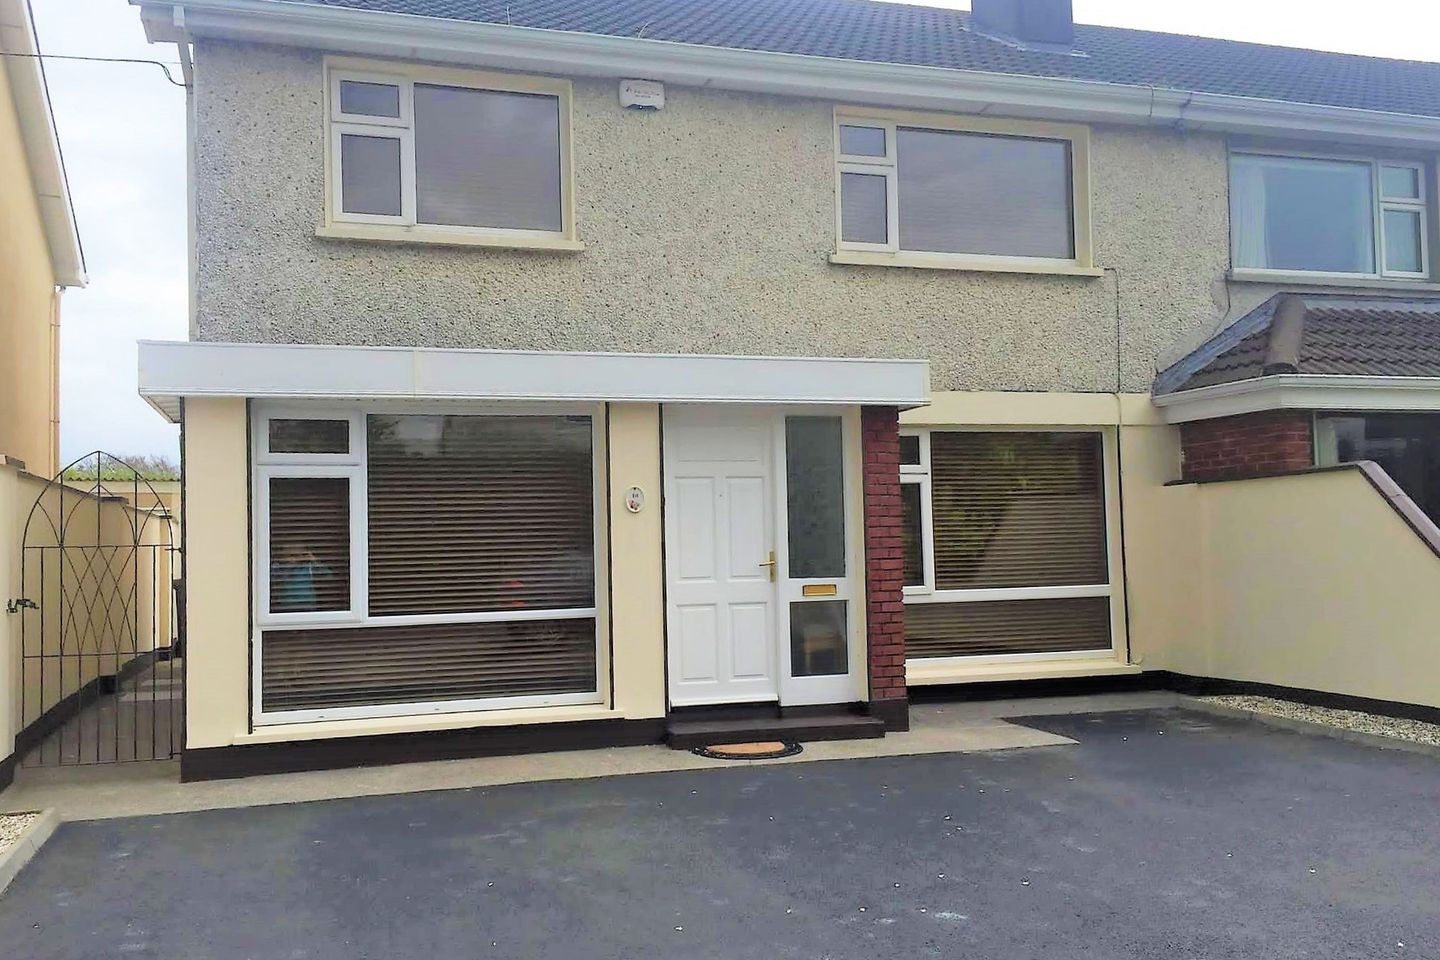 10 Clifton Avenue, Newcastle, Newcastle, Co. Galway